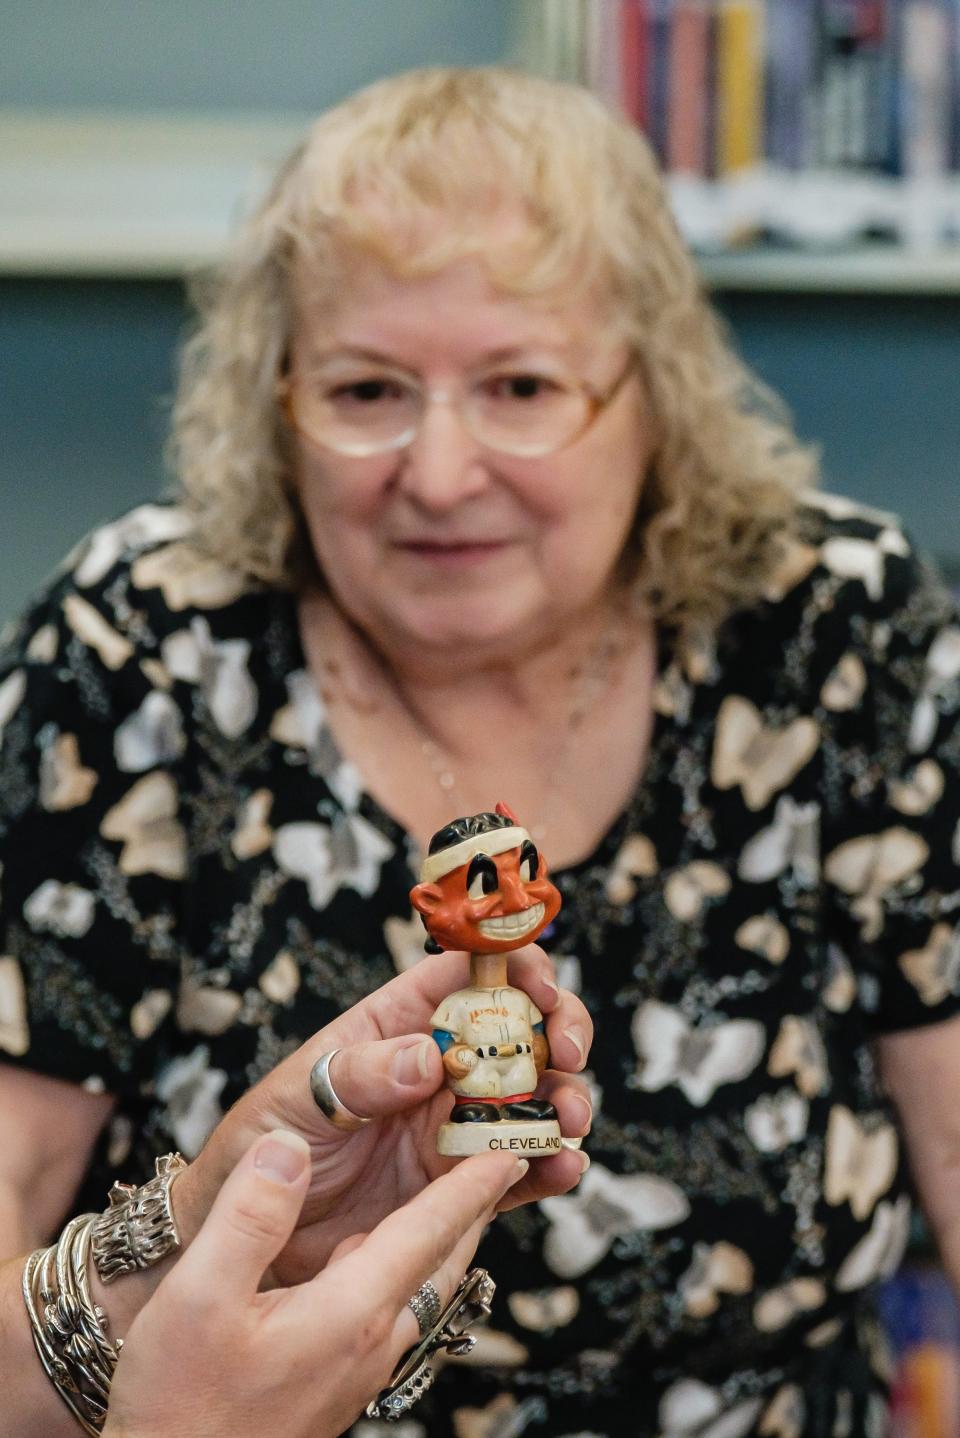 Denise Gilmore of Sugarcreek watches as Jason Adams appraises an antique Cleveland bobblehead Thursday at the New Philadelphia branch of the Tuscarawas County Library.